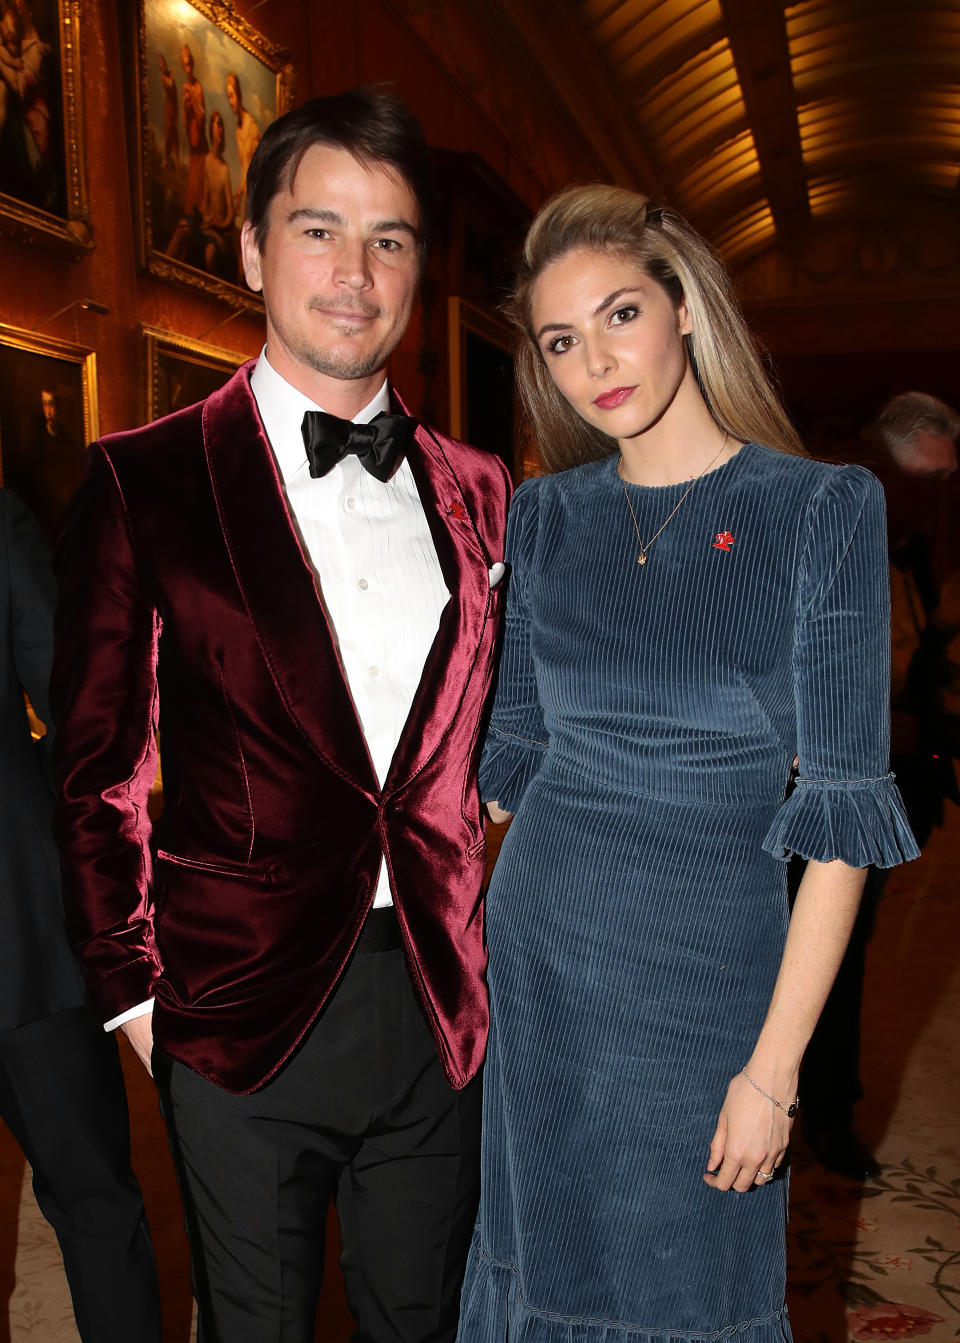 Josh Hartnett and Tamsin Egerton attend a dinner to celebrate The Prince's Trust, hosted by Prince Charles, Prince of Wales at Buckingham Palace on March 12, 2019 in London, England. (Photo by Chris Jackson - WPA Pool/Getty Images)